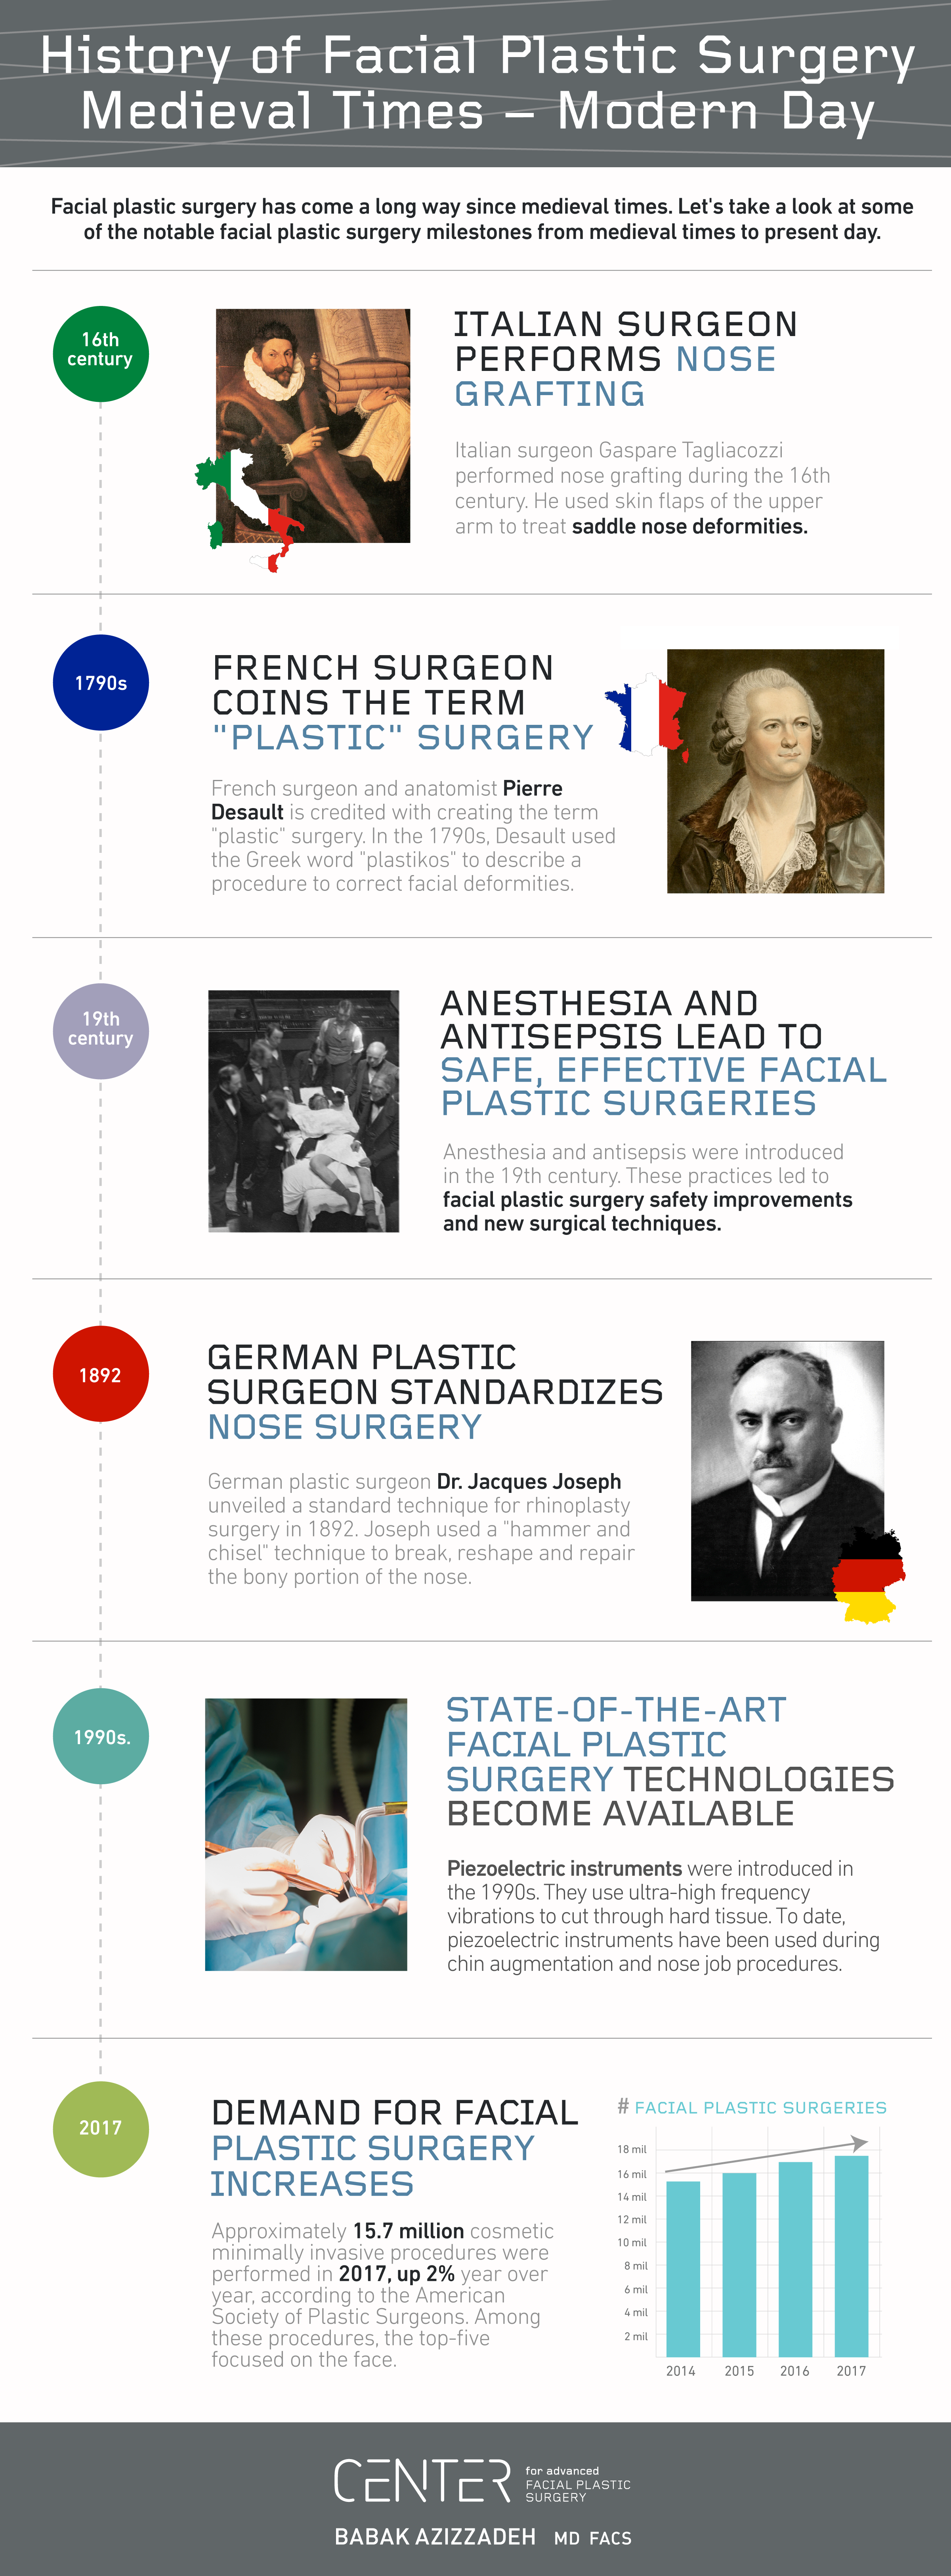 History of Facial Plastic Surgery: Medieval Times – Modern Day